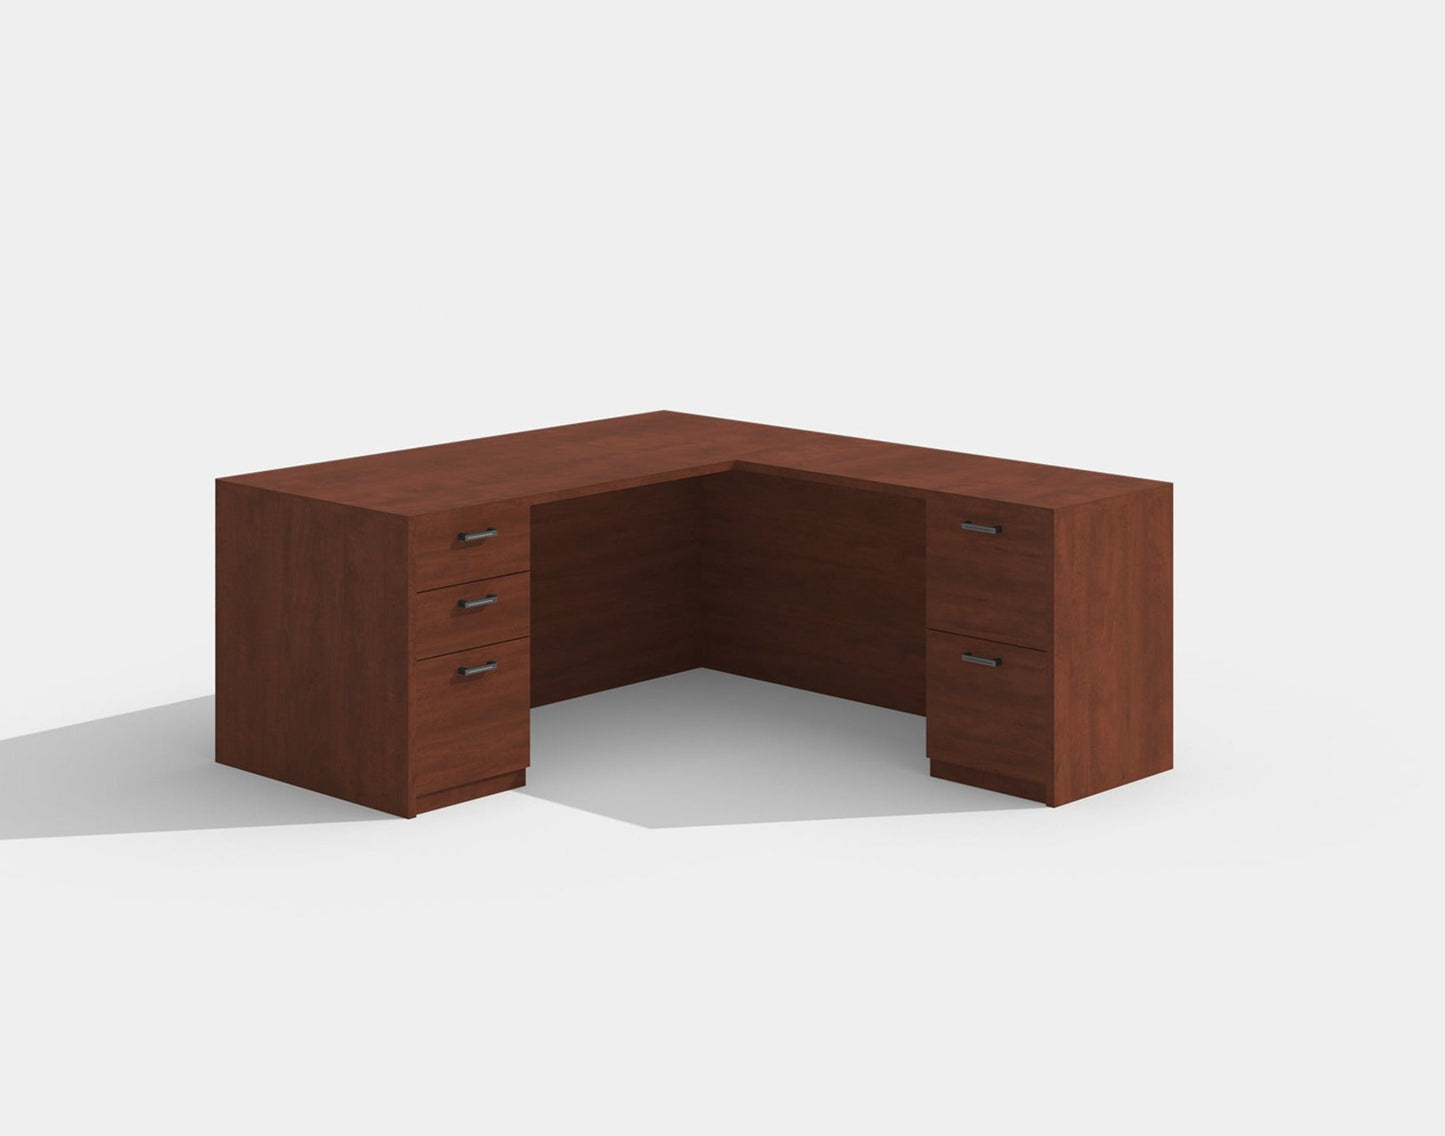 Amber 6x6 L Shaped Executive Office Desk by Cherryman Industries - Wholesale Office Furniture